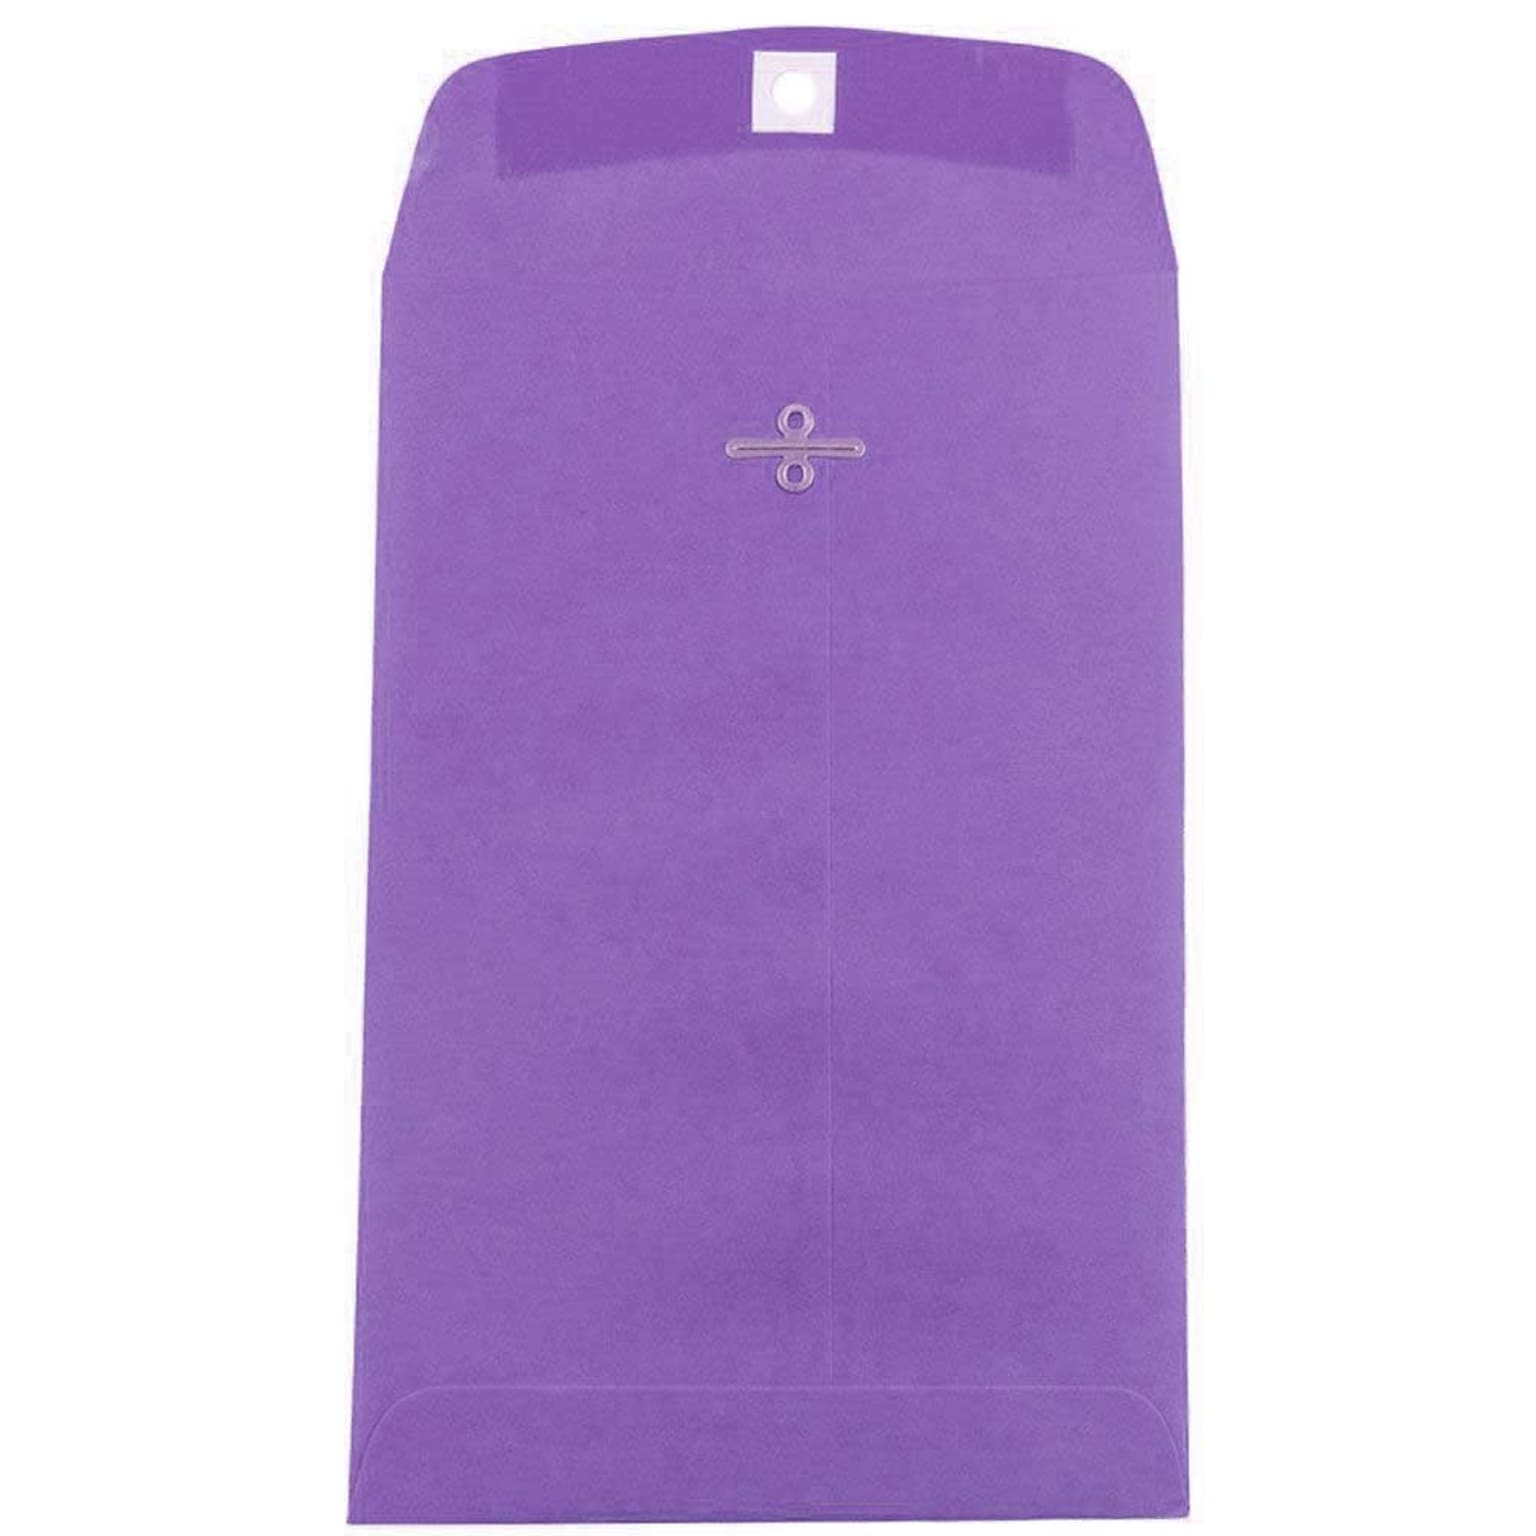 JAM Paper® 6 x 9 Open End Catalog Colored Envelopes with Clasp Closure, Violet Purple Recycled, 10/Pack (87956B)